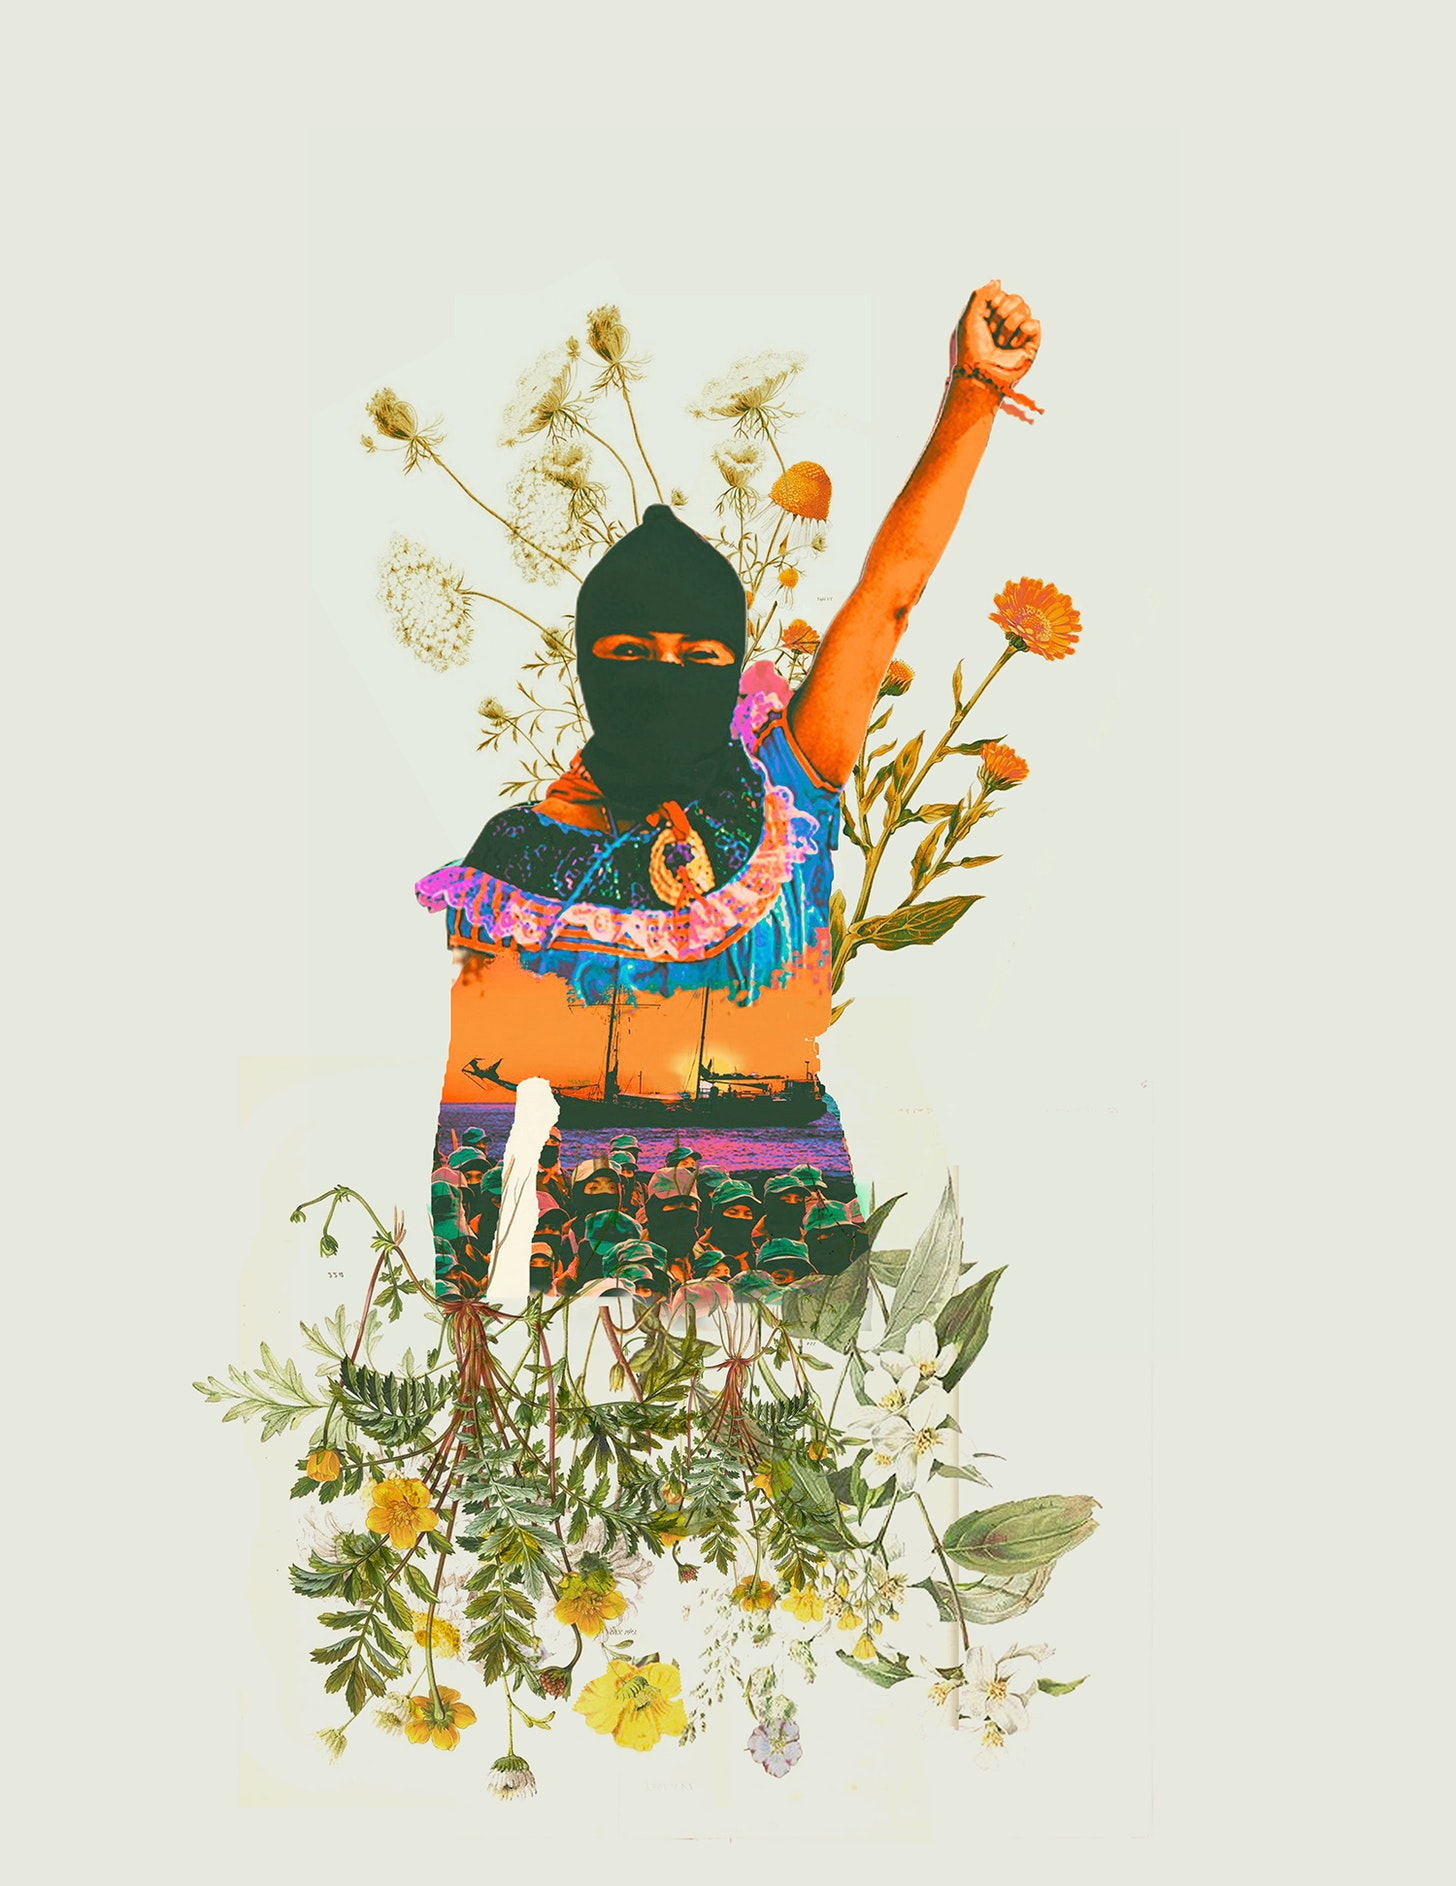 A Zapatist woman with fist raised